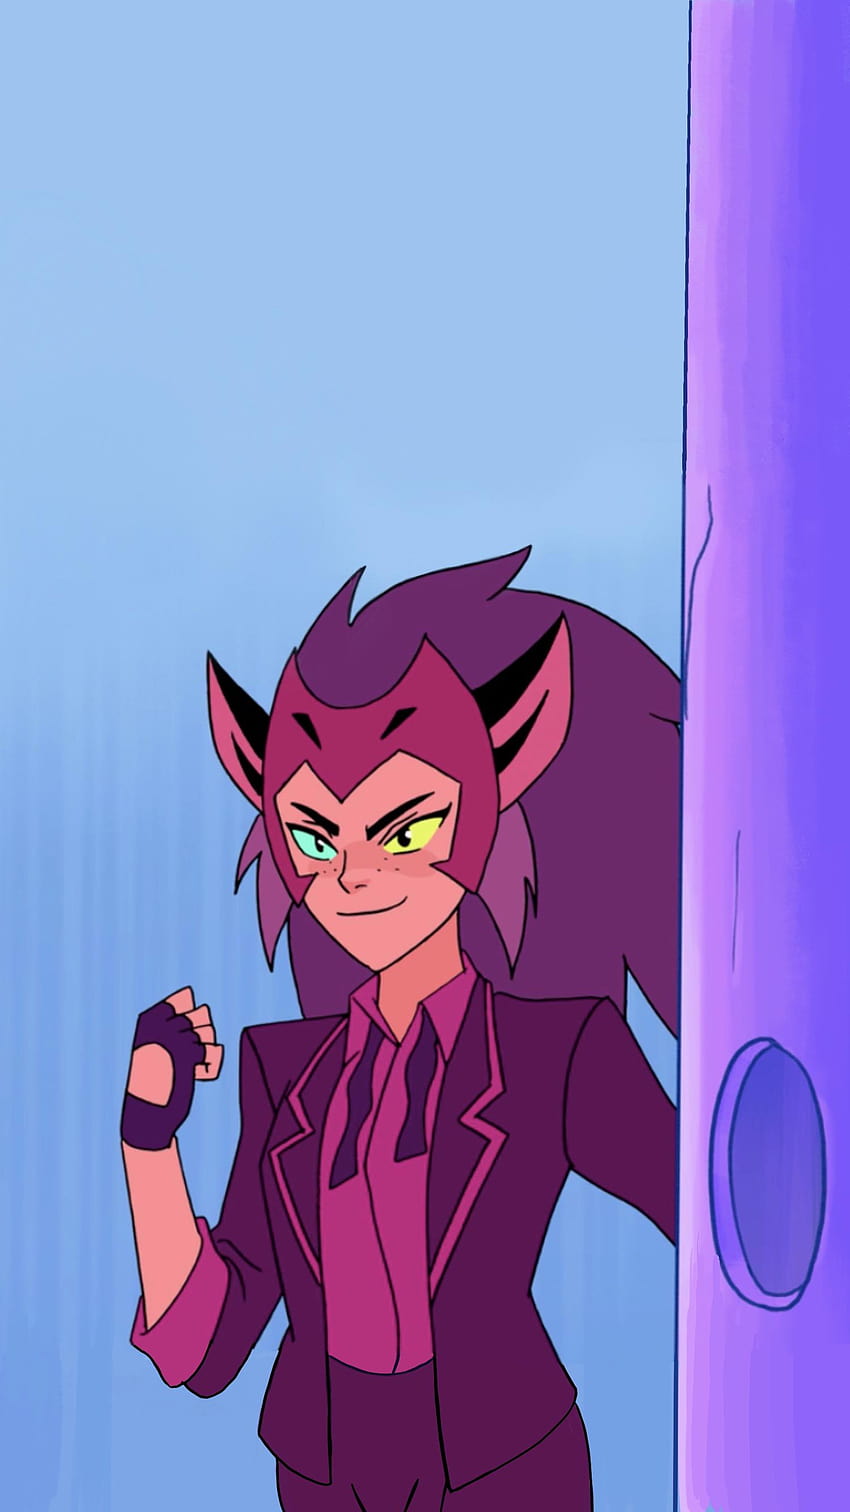 I extended this screencap vertically so I could use it as a mobile because I need Catra in a suit to be the first thing I see when I wake up :, catra and adora HD phone wallpaper